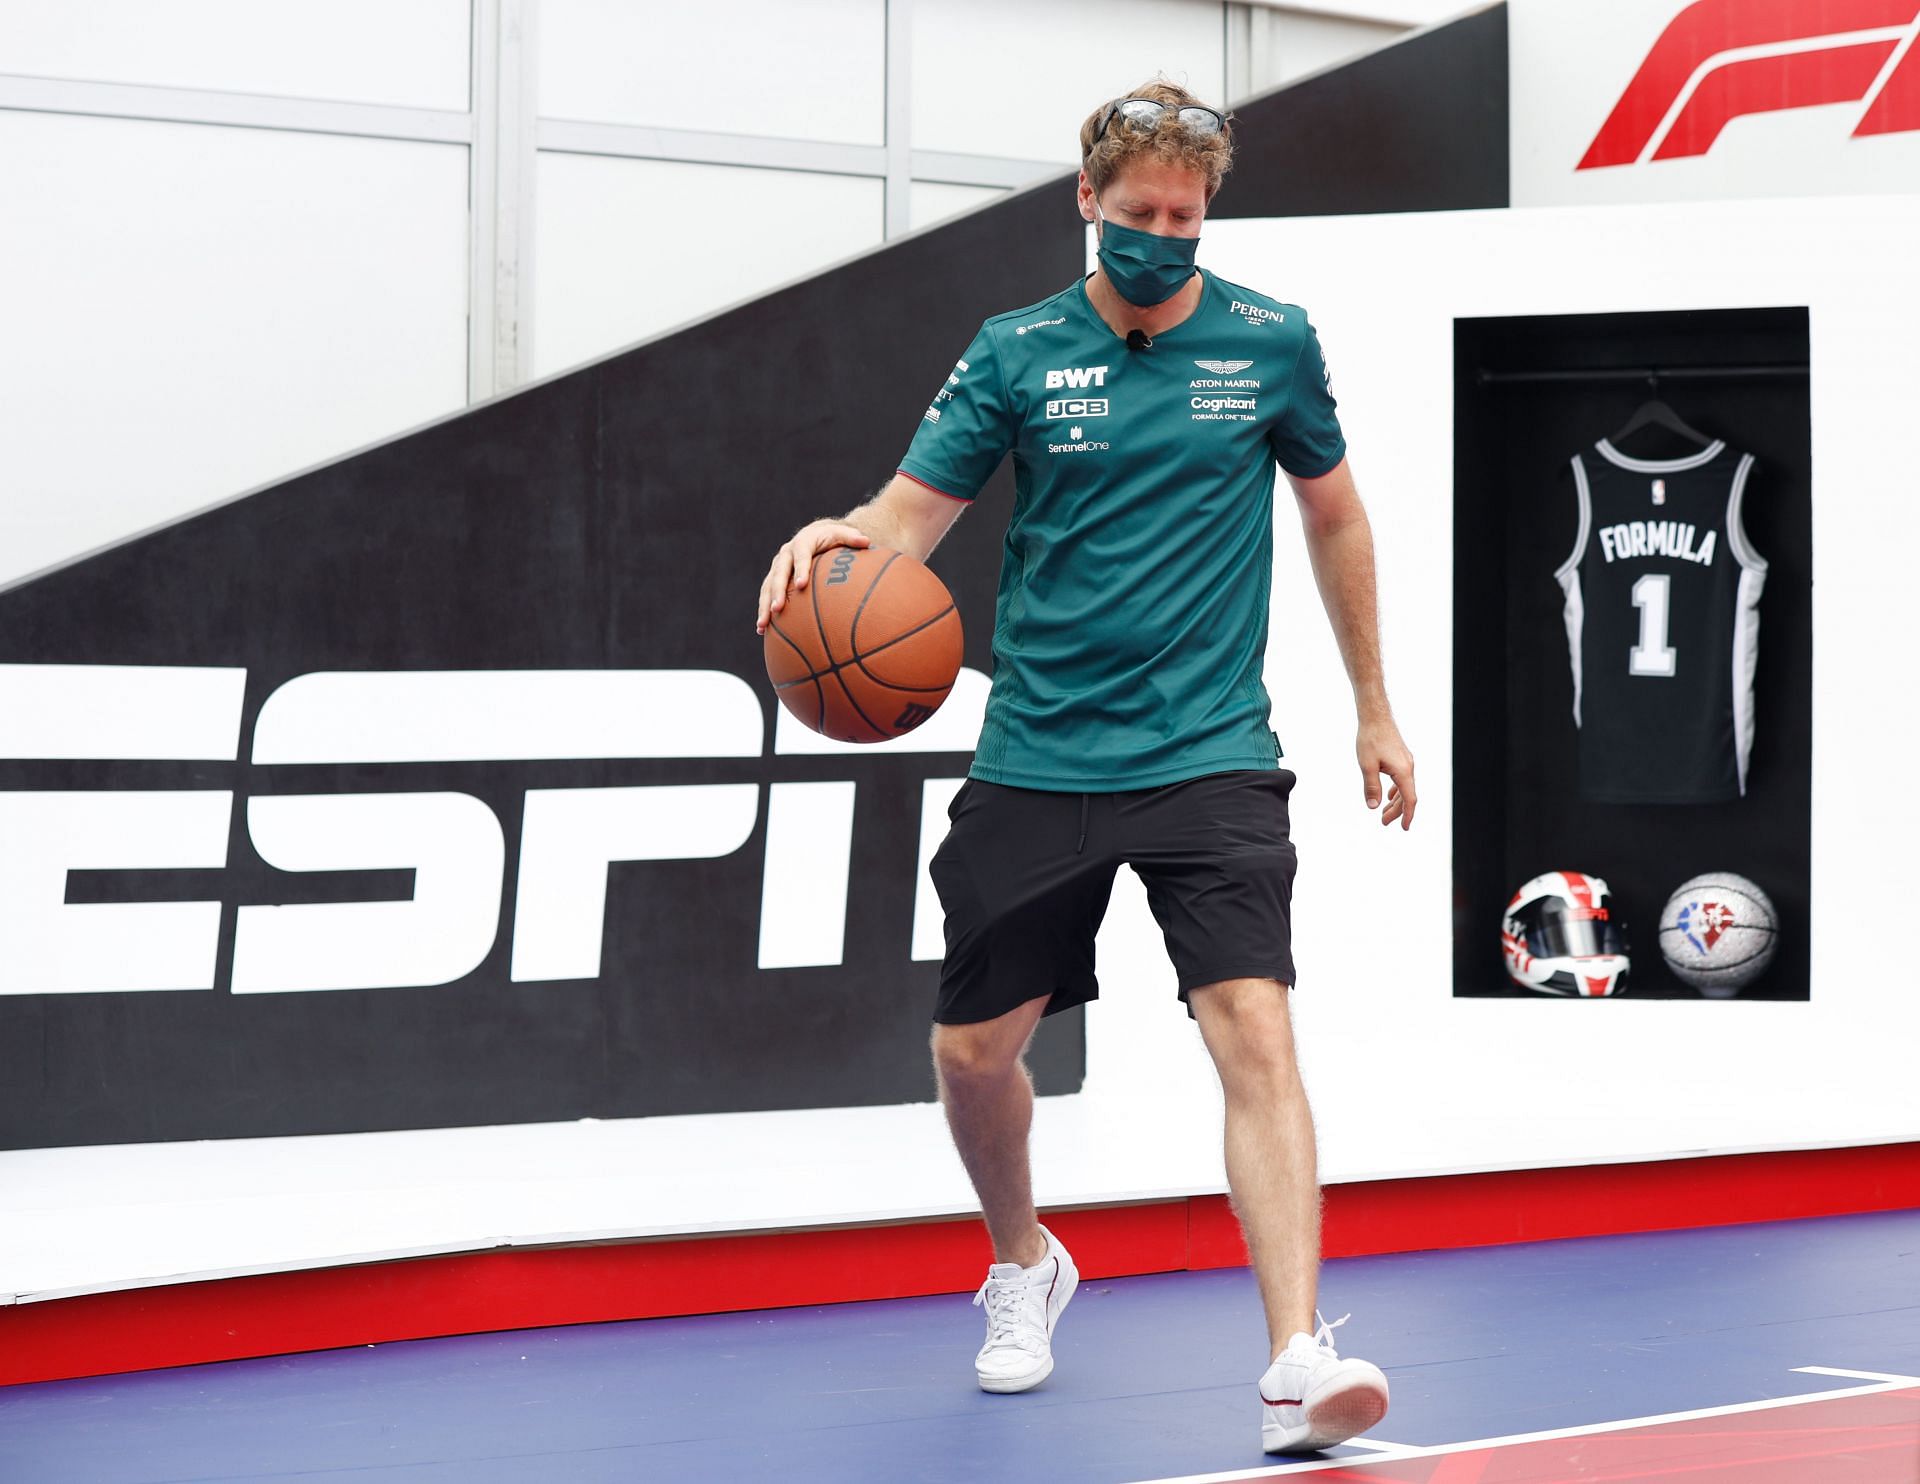 Sebastian Vettel of Aston Martin F1 Team plays basketball on the NBA court in the Paddock during previews ahead of the F1 Grand Prix of USA at Circuit of The Americas in Austin, Texas. (Photo by Jared C. Tilton/Getty Images)